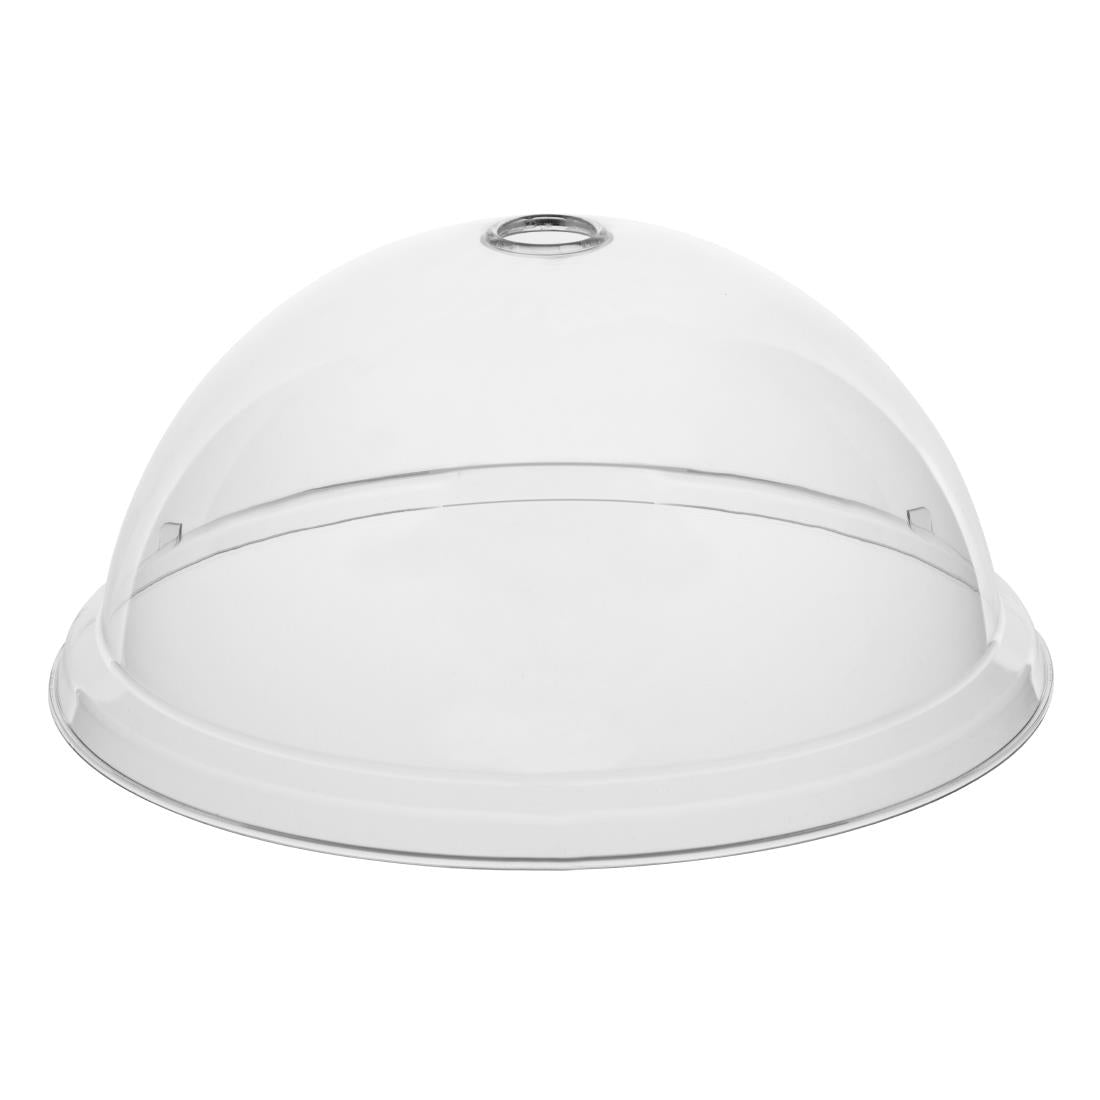 DP791 Olympia Kristallon Polycarbonate Domed Plate Cover Round 260mm